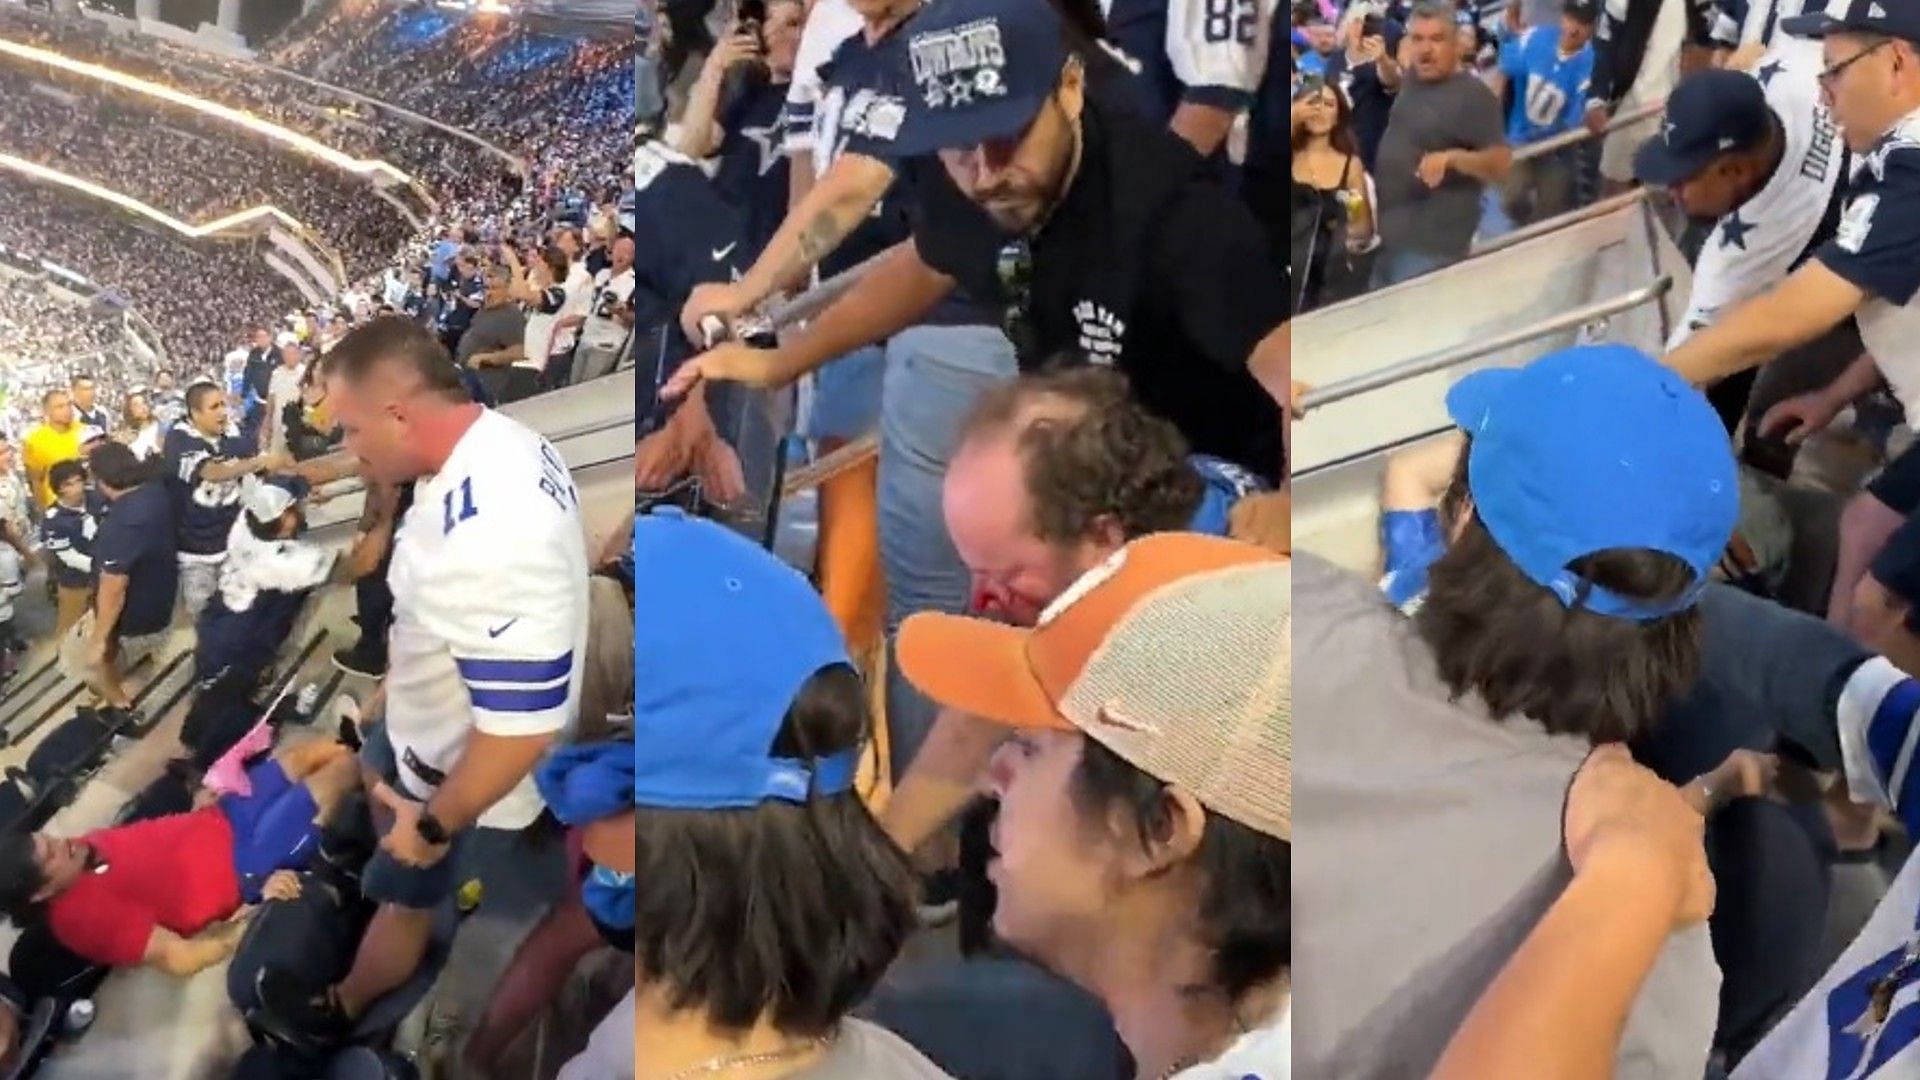 WATCH: Chargers fan left bloodied after massive fight with Cowboys fans at SoFi stadium